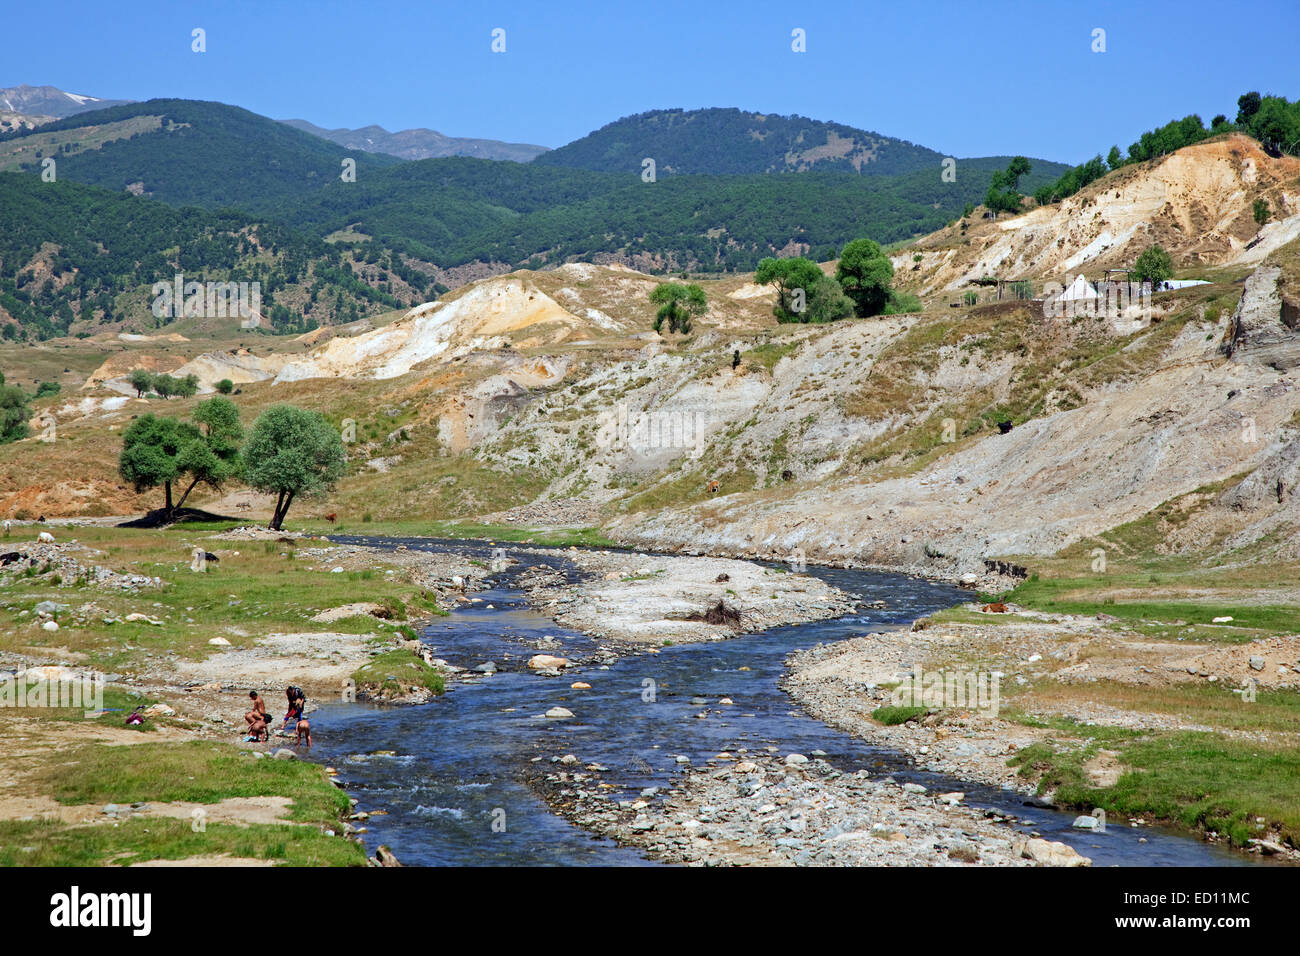 Nomad children washing in river near semi-nomad settlement in the mountains of Eastern Anatolia, Turkey Stock Photo